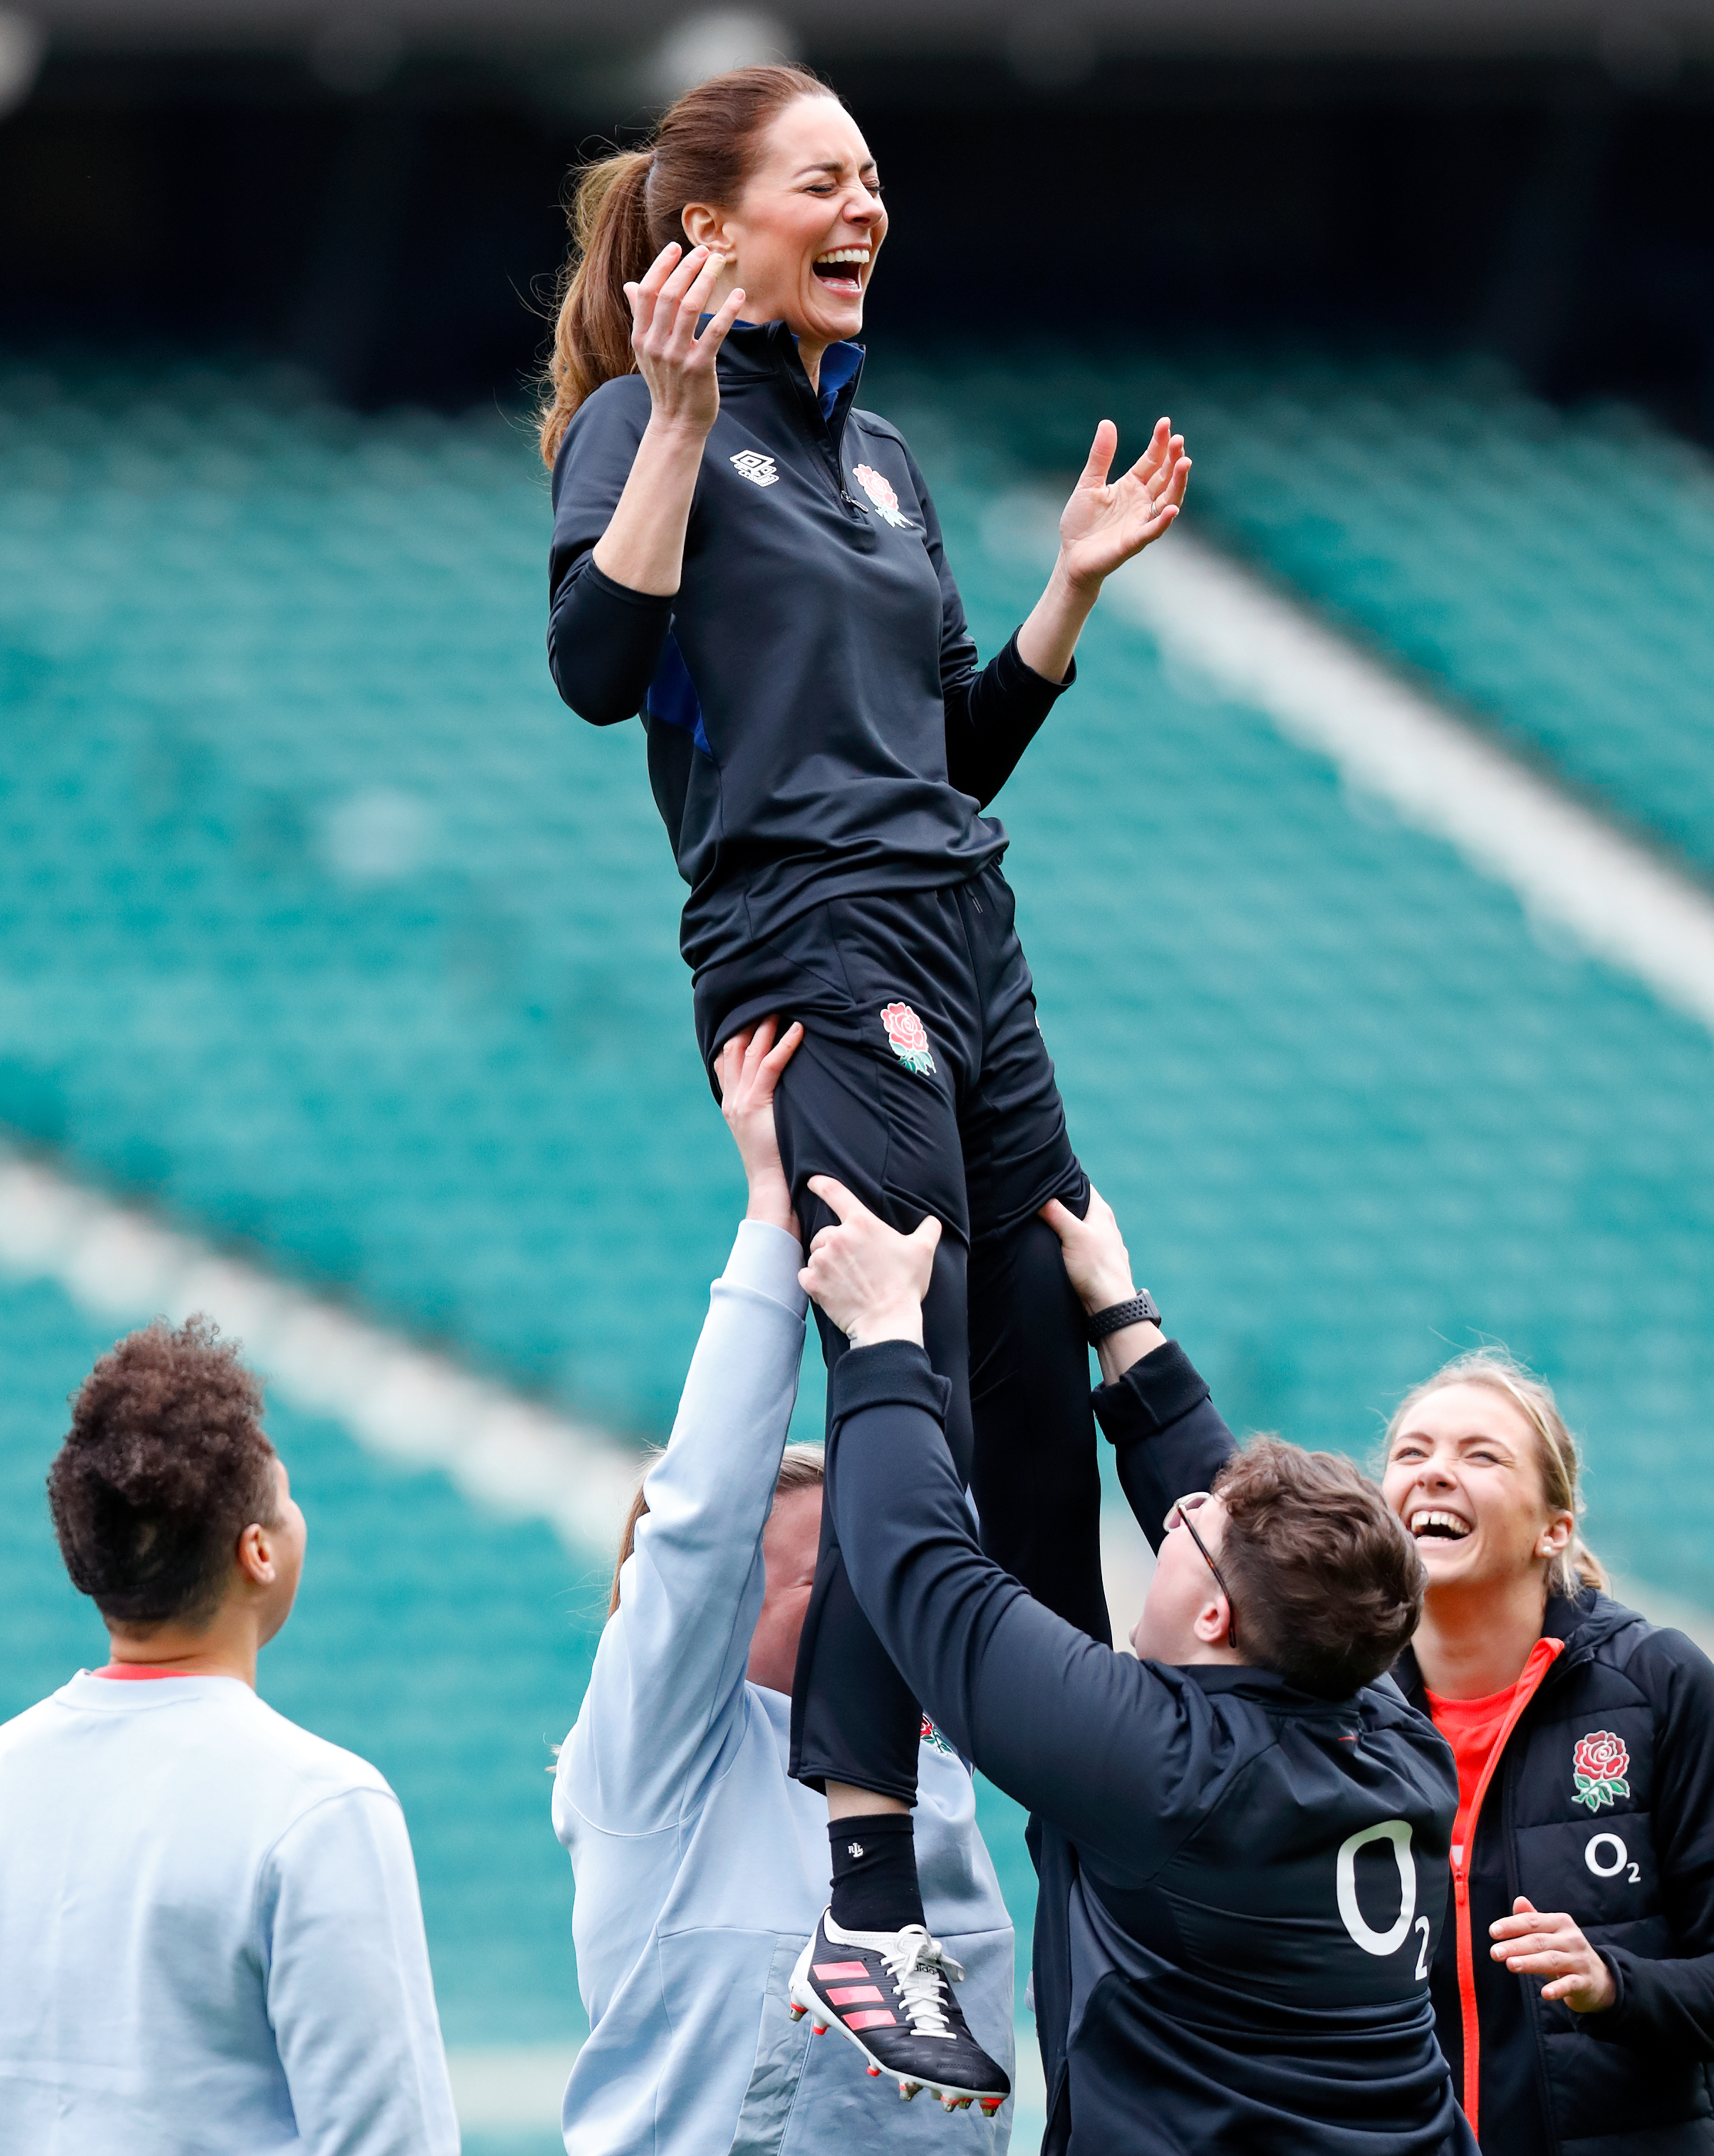 Princess Catherine having fun during an England Rugby Training Session after she became a Patron of the Rugby Football Union in London, England on February 2, 2022 | Source: Getty Images